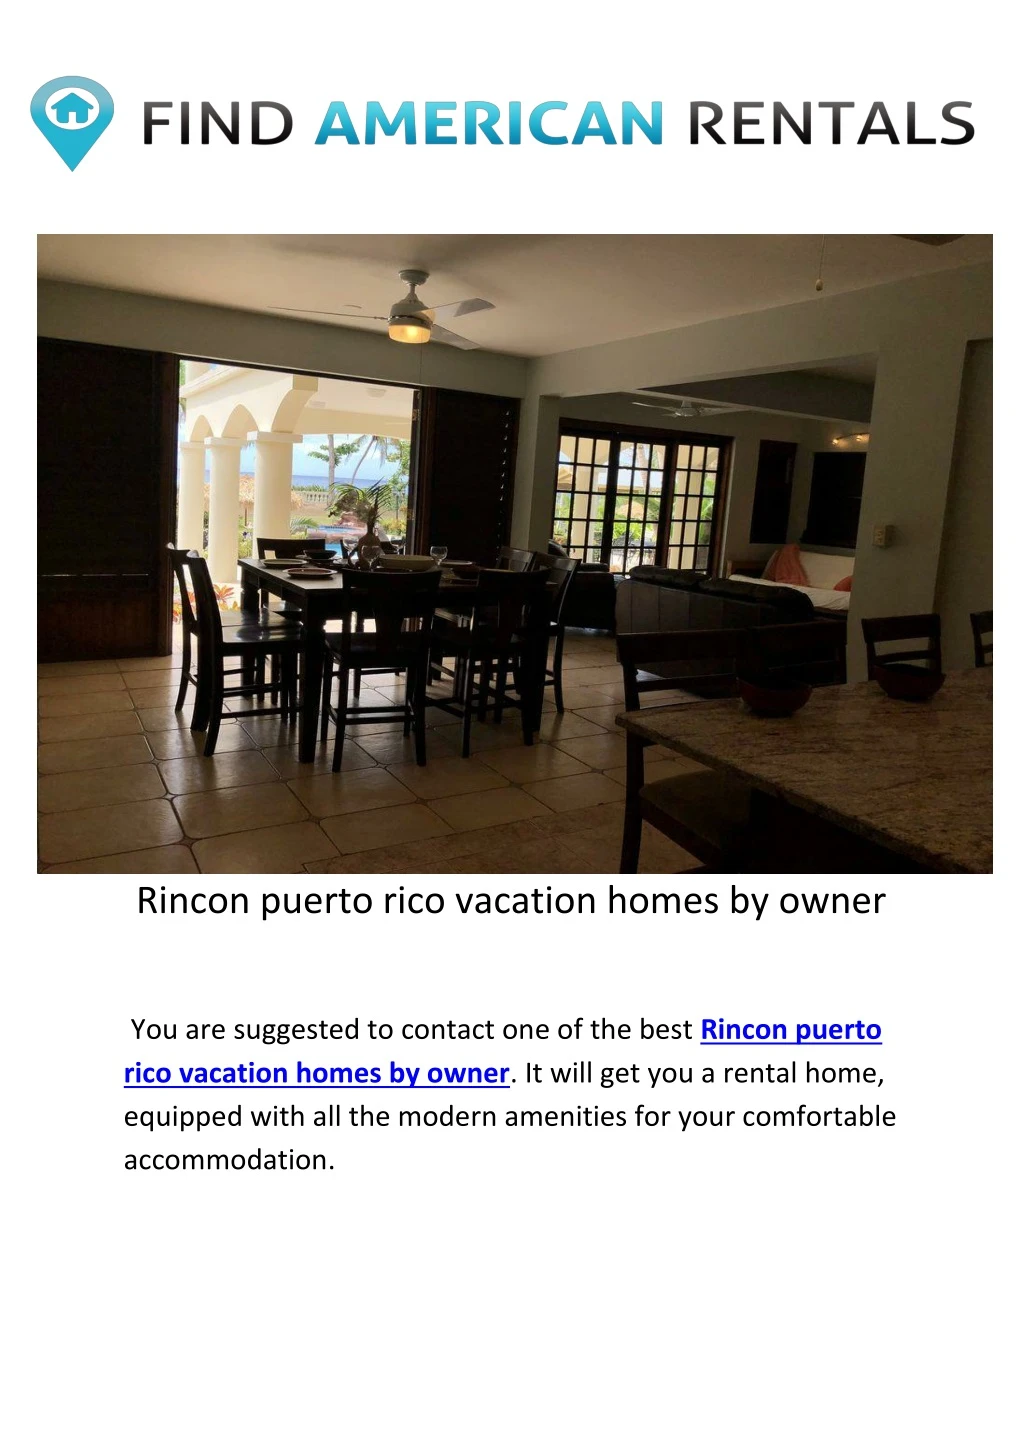 rincon puerto rico vacation homes by owner